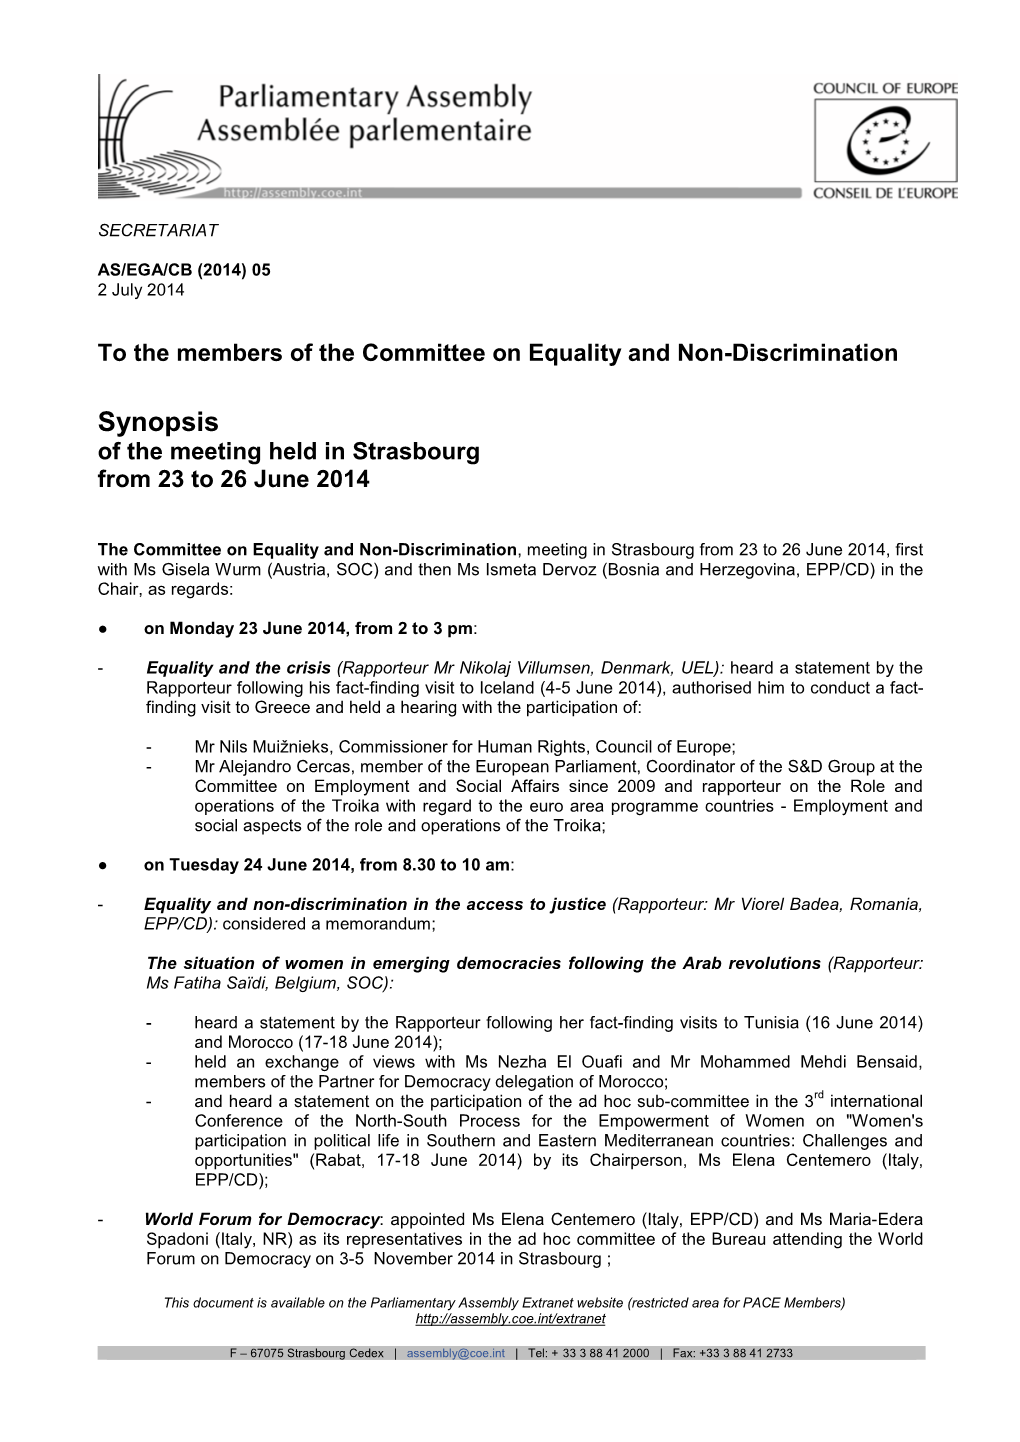 Synopsis of the Meeting Held in Strasbourg from 23 to 26 June 2014